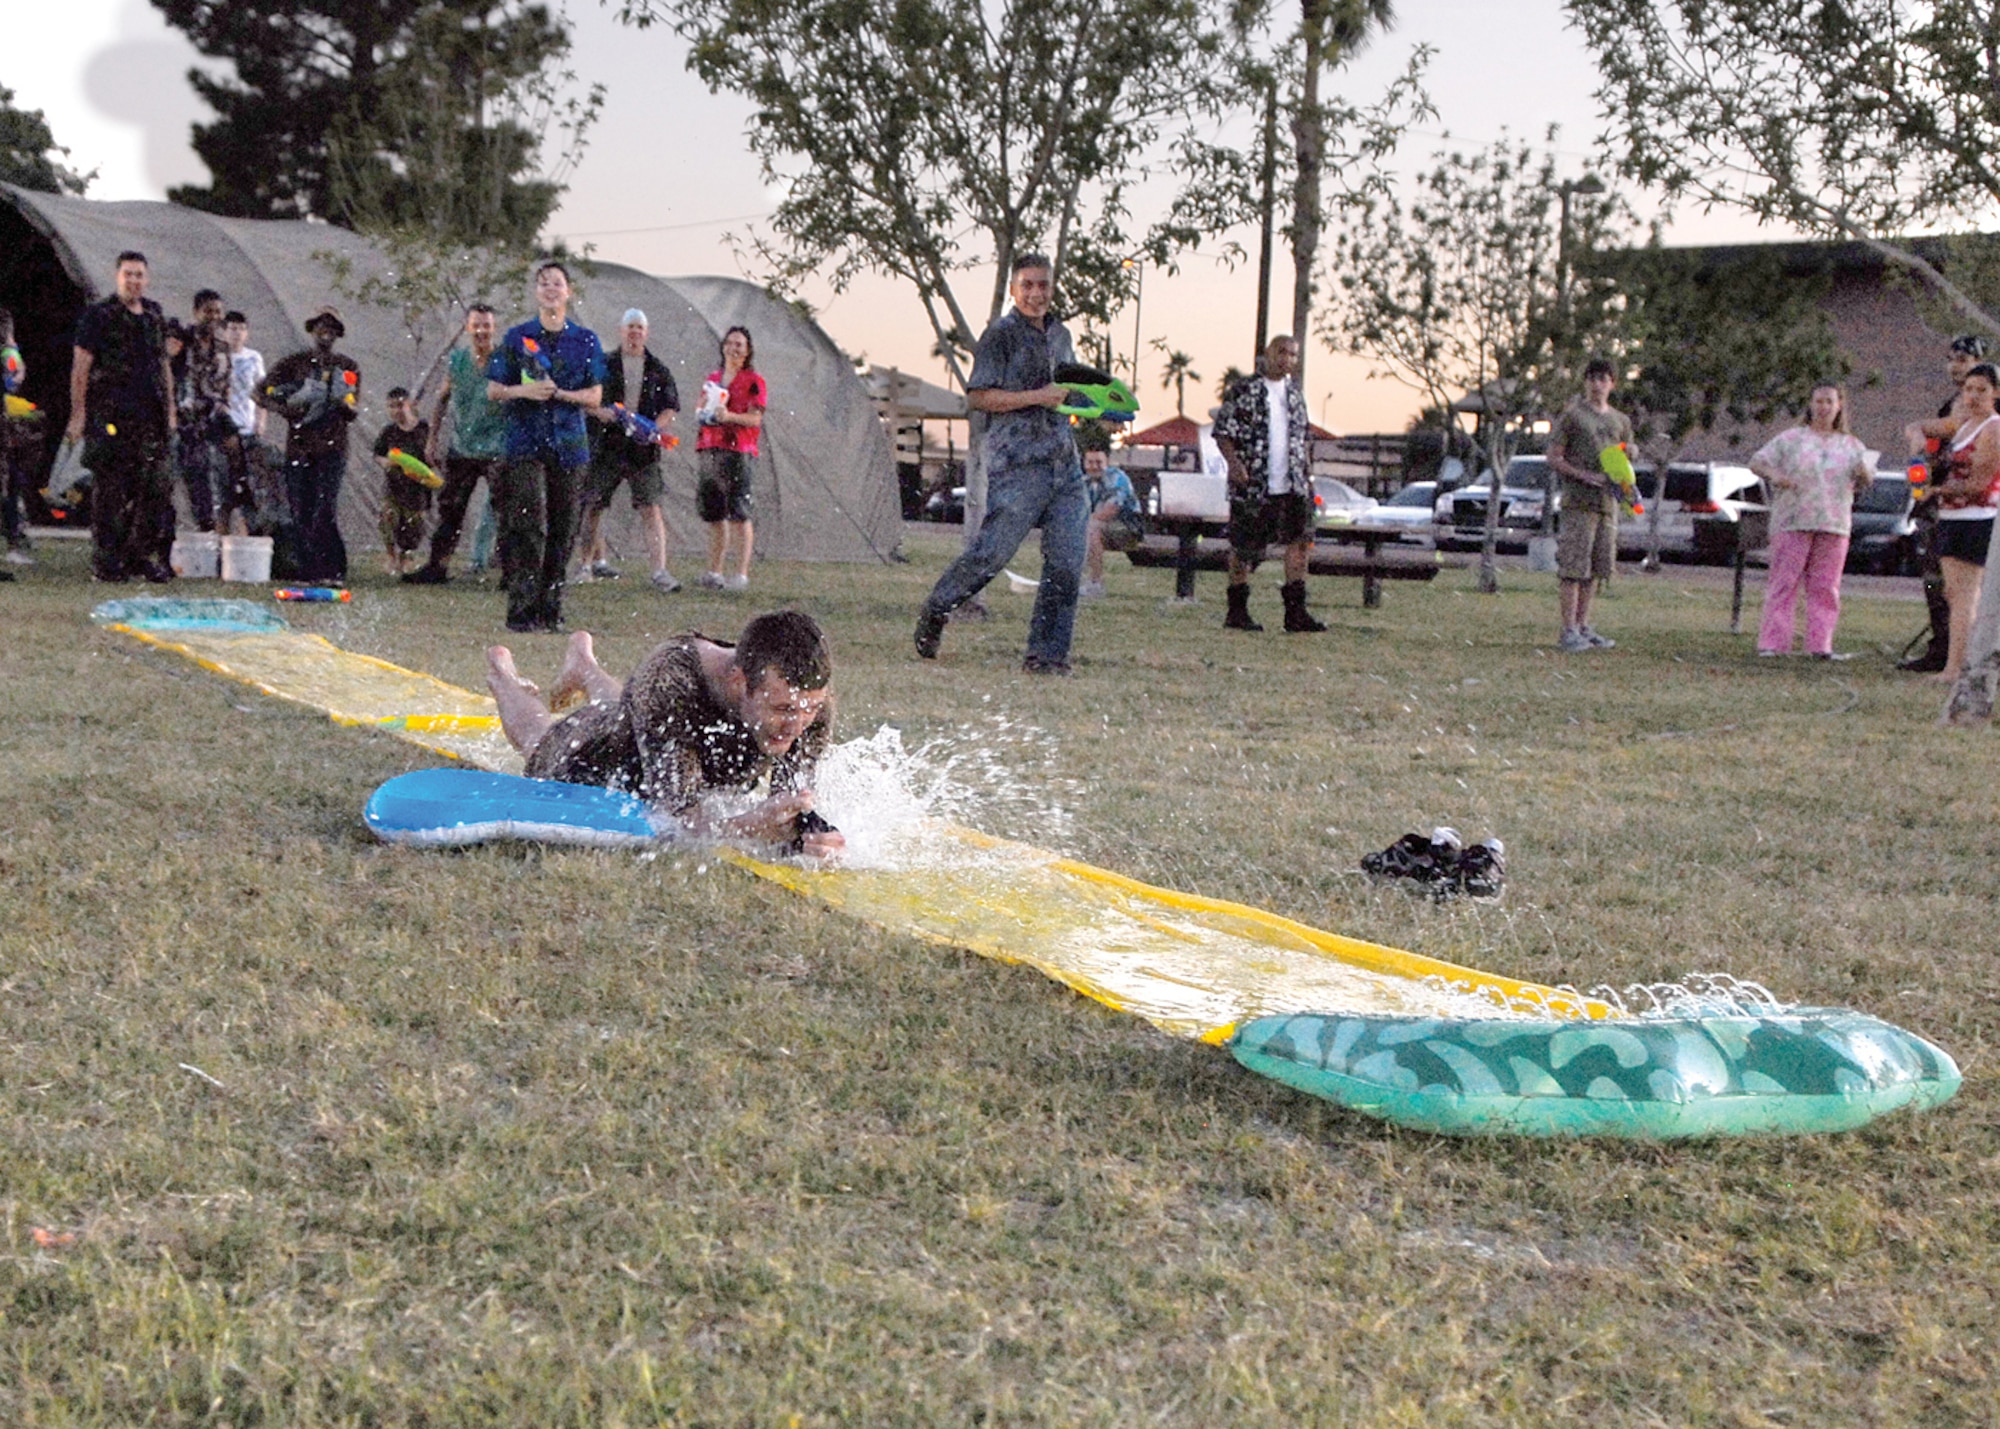 Airman 1st Class Aaron Youngblood, 56th Medical Operations Squadron physical therapist technician, slides across the slip-and-slide during the 56th Medical Group MASH Bash held at Fowler Park Saturday. (U.S. Air Force photo/Airman 1st Class Ronifel Yasay)